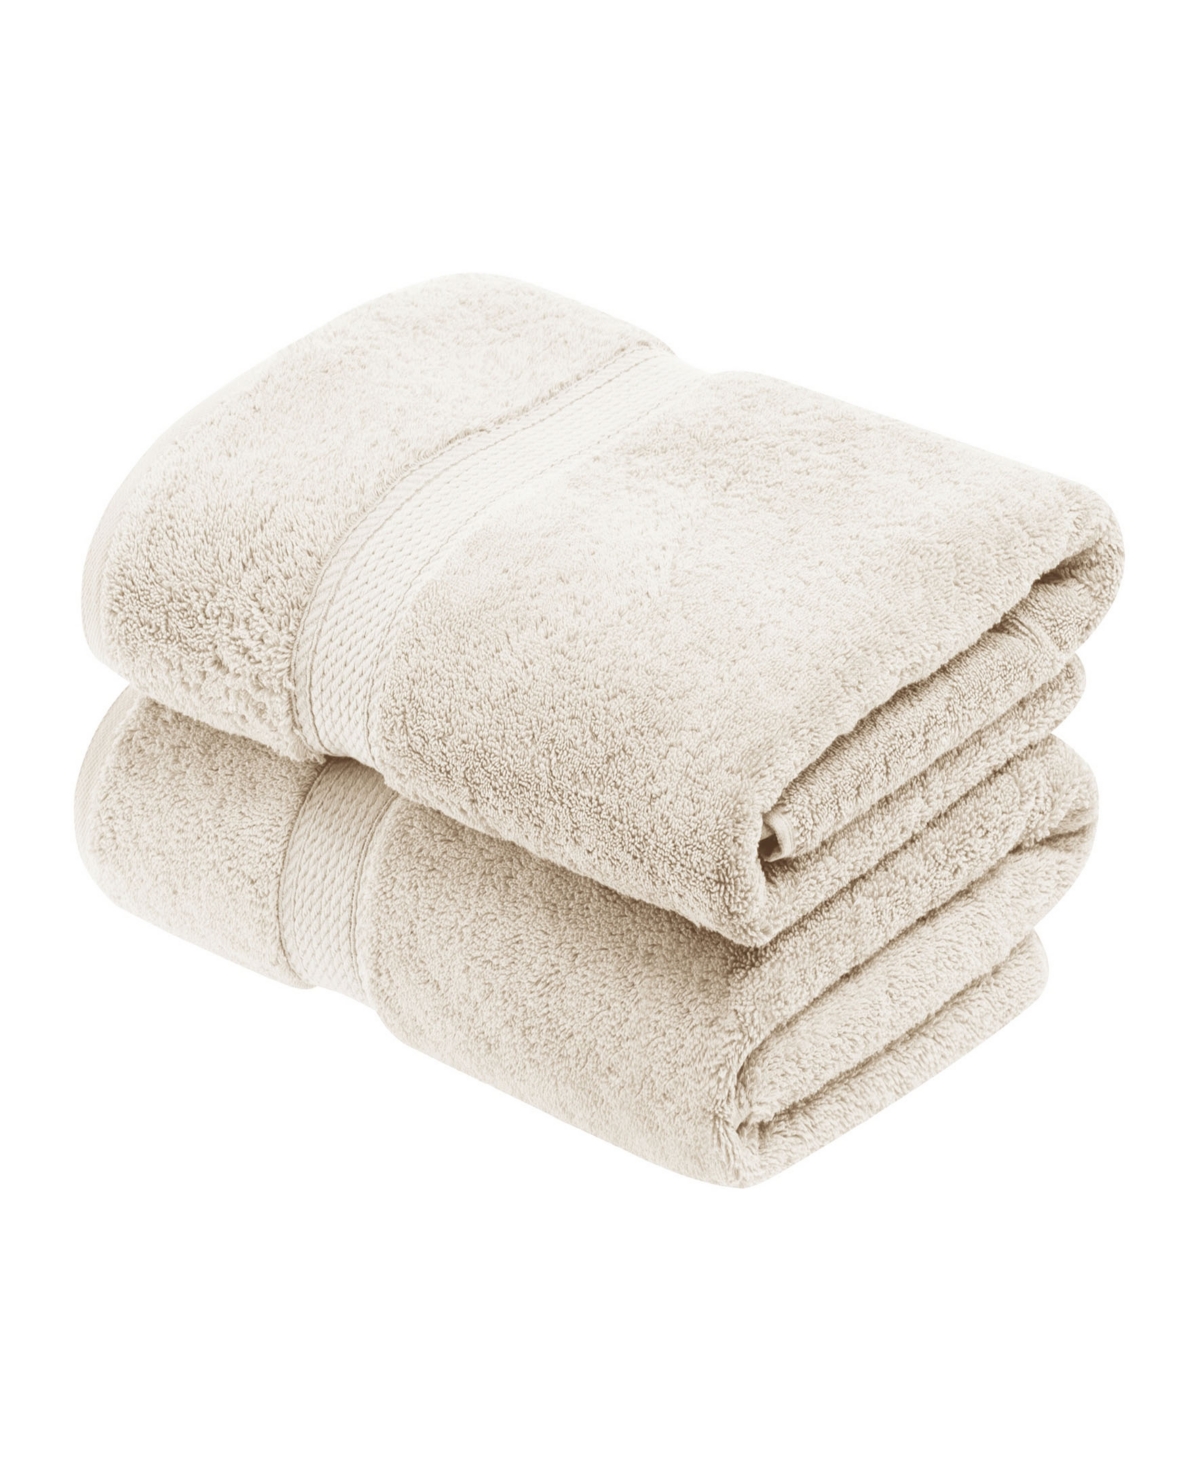 Superior Highly Absorbent Egyptian Cotton 2-piece Ultra Plush Solid Bath Towel Set Bedding In Cream